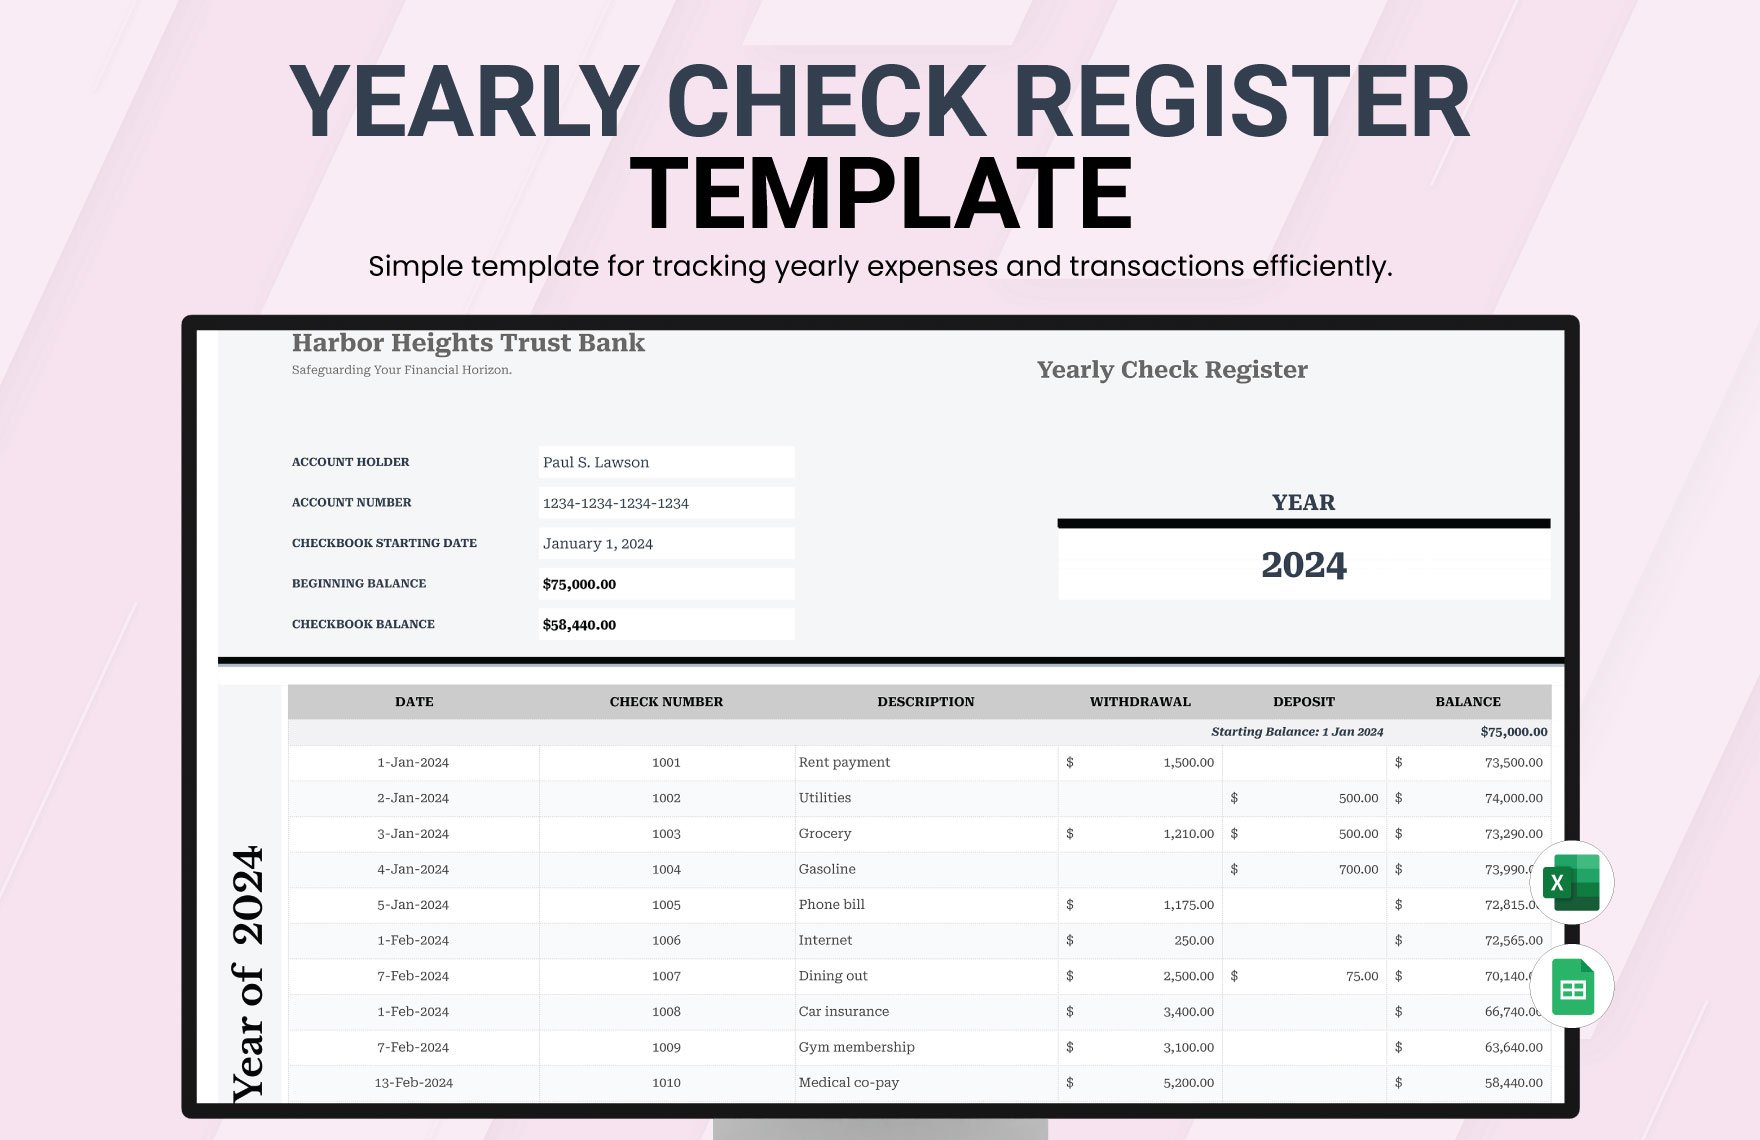 Yearly Check Register Template in Excel, Google Sheets